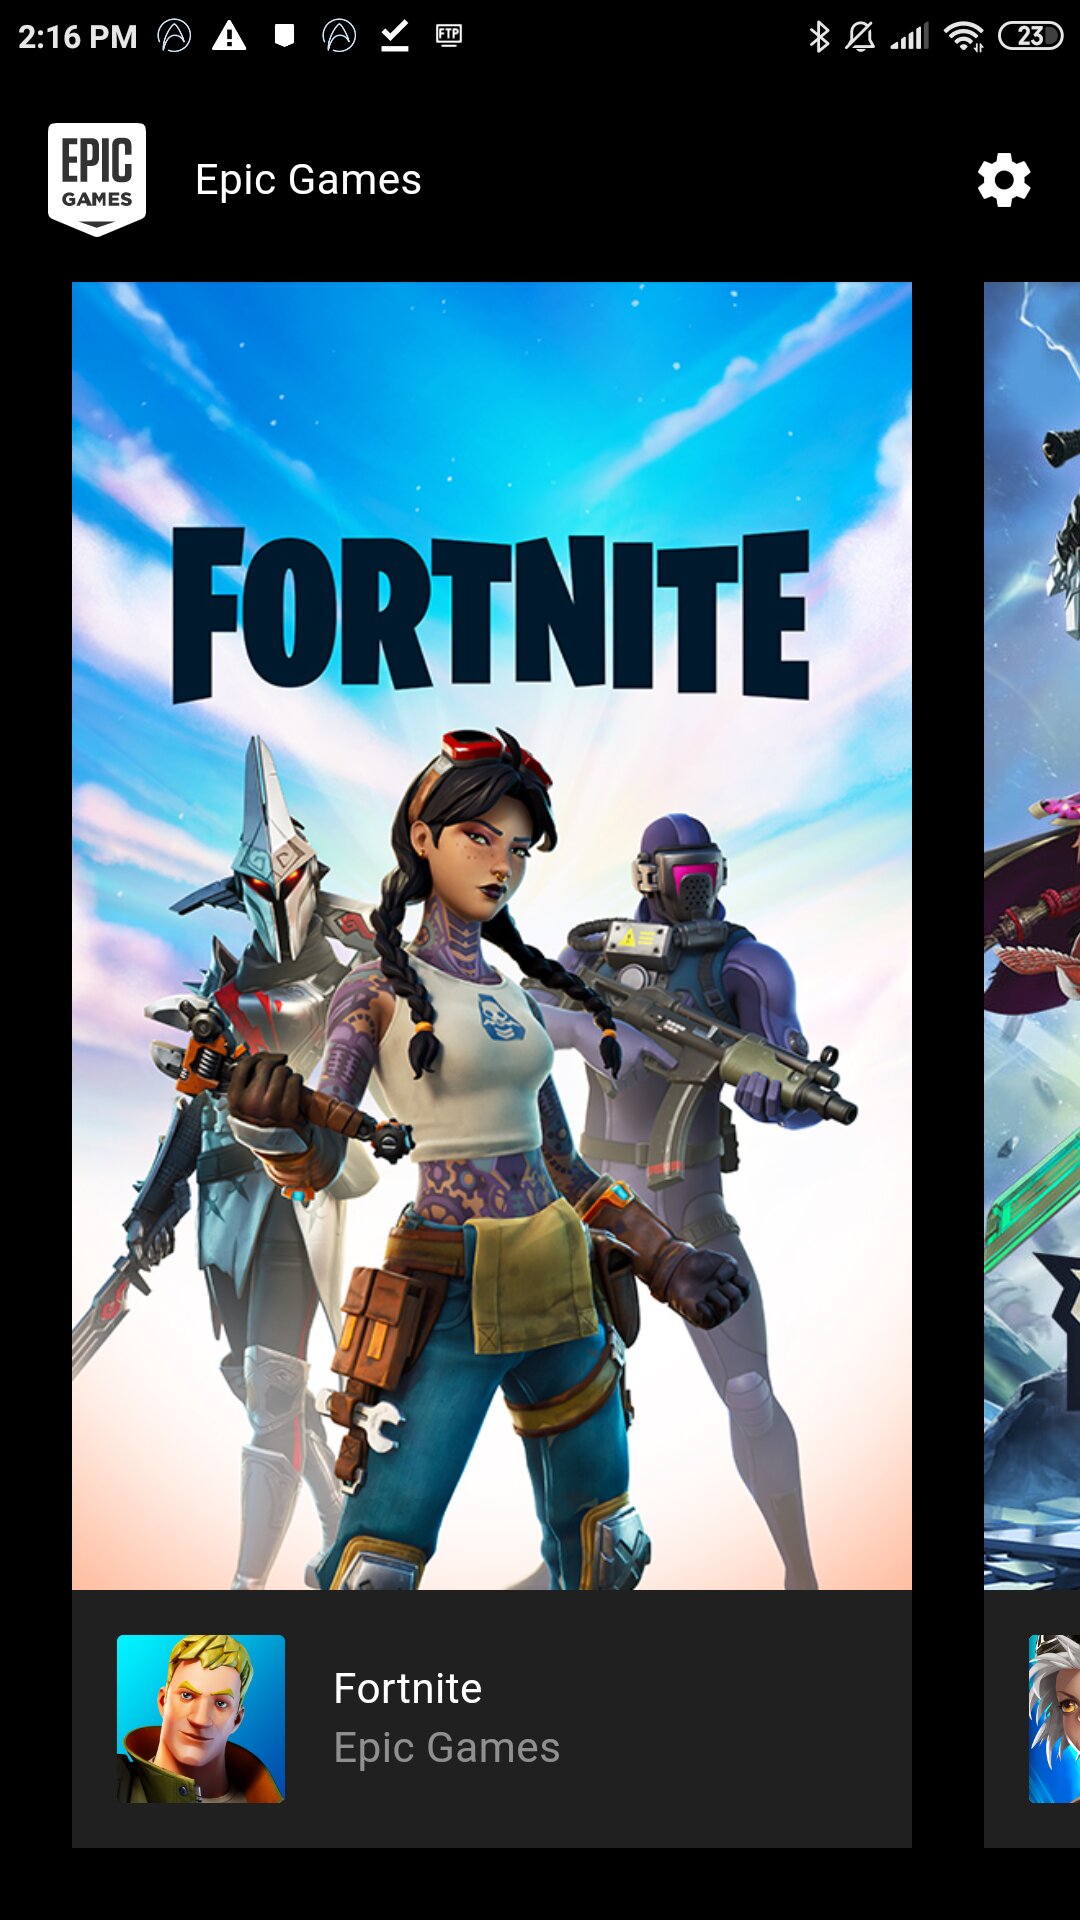 Download Epic Games Store 5.3.0 for Android